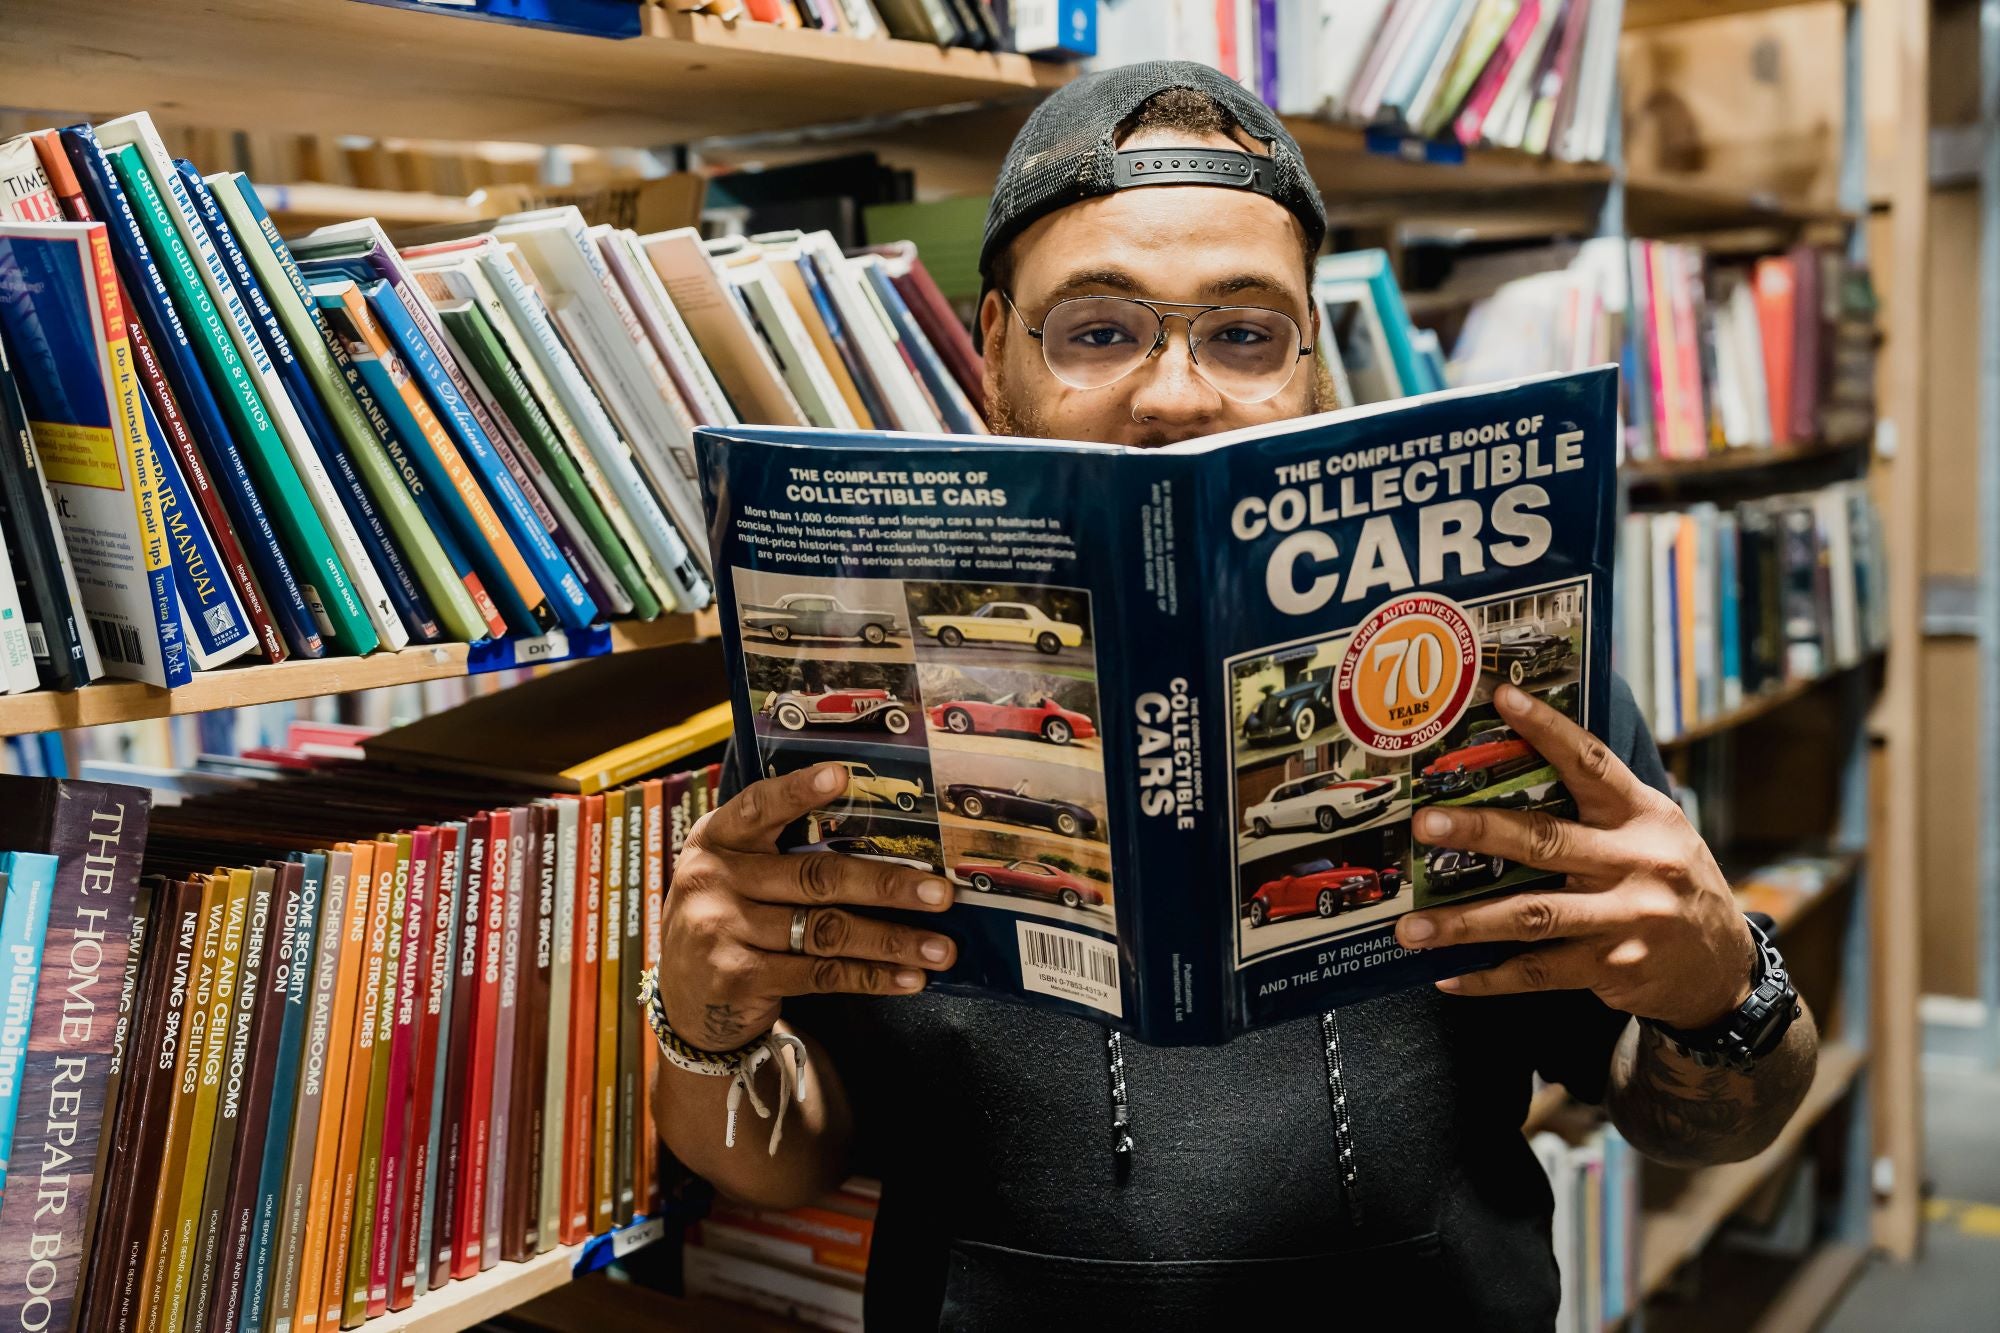 person holding up book about collectible cars and looking at camera